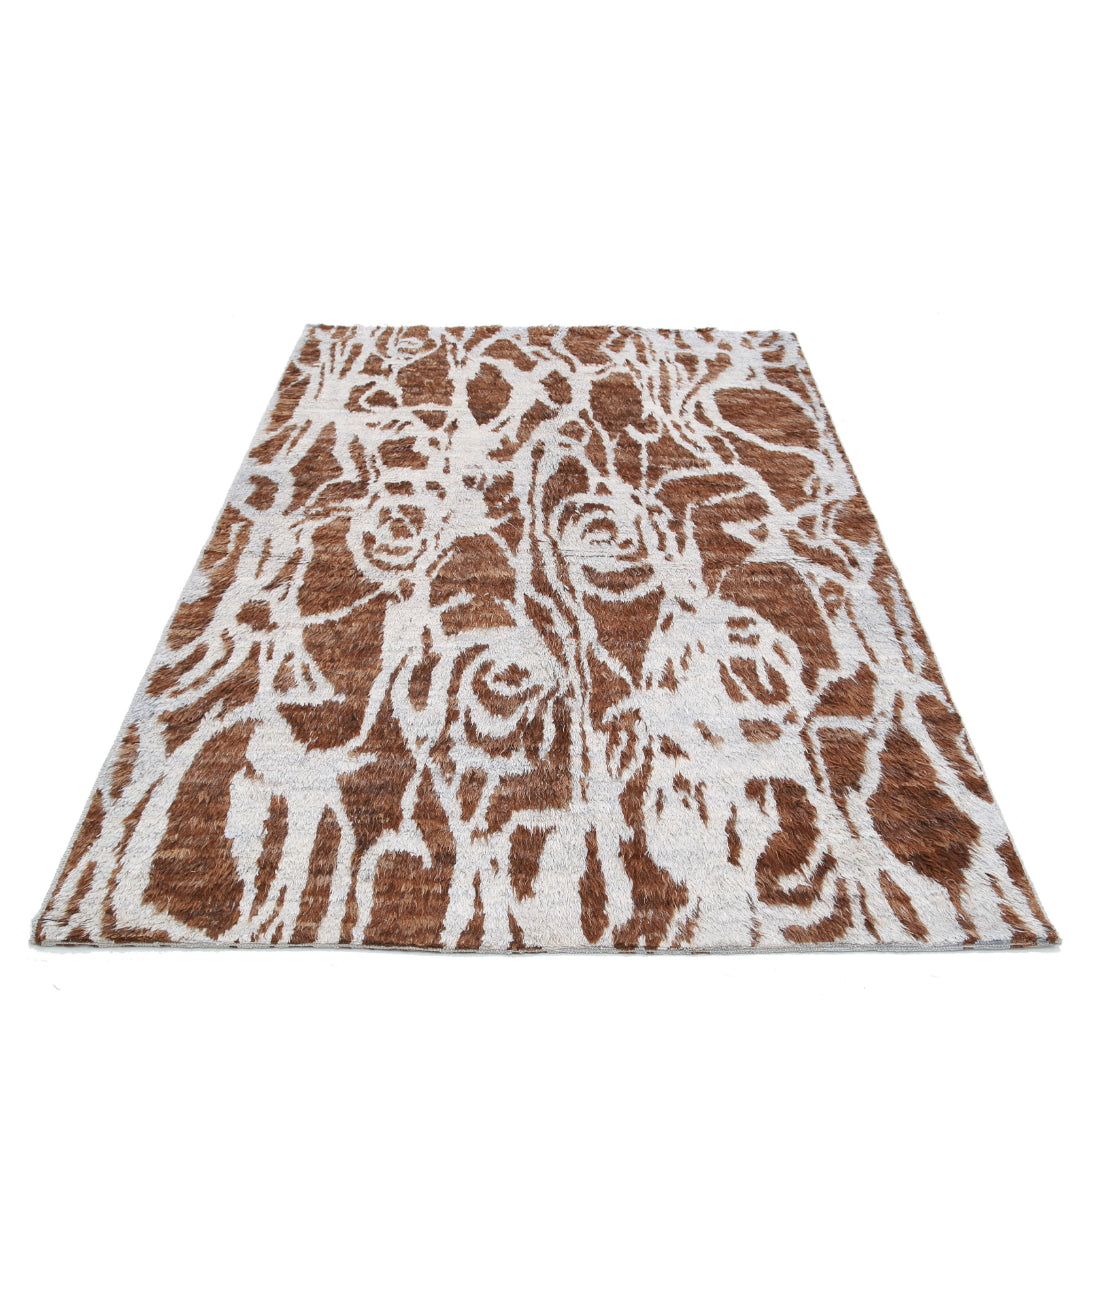 Hand Knotted Tribal Moroccan Wool Rug - 5'1'' x 7'3'' 5'1'' x 7'3'' (153 X 218) / Grey / Brown